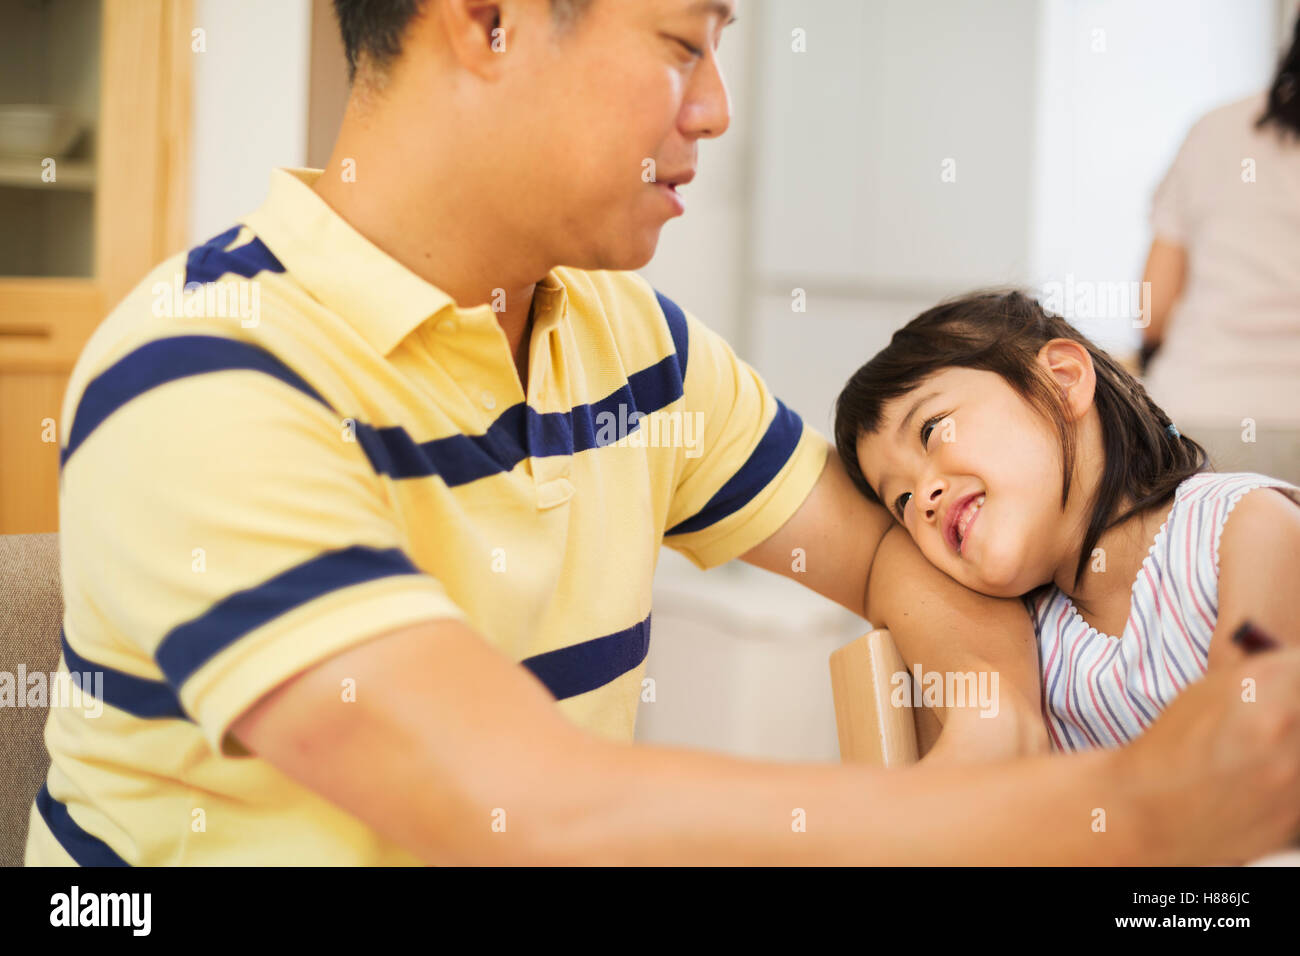 Family home. A man and his daughter. Stock Photo